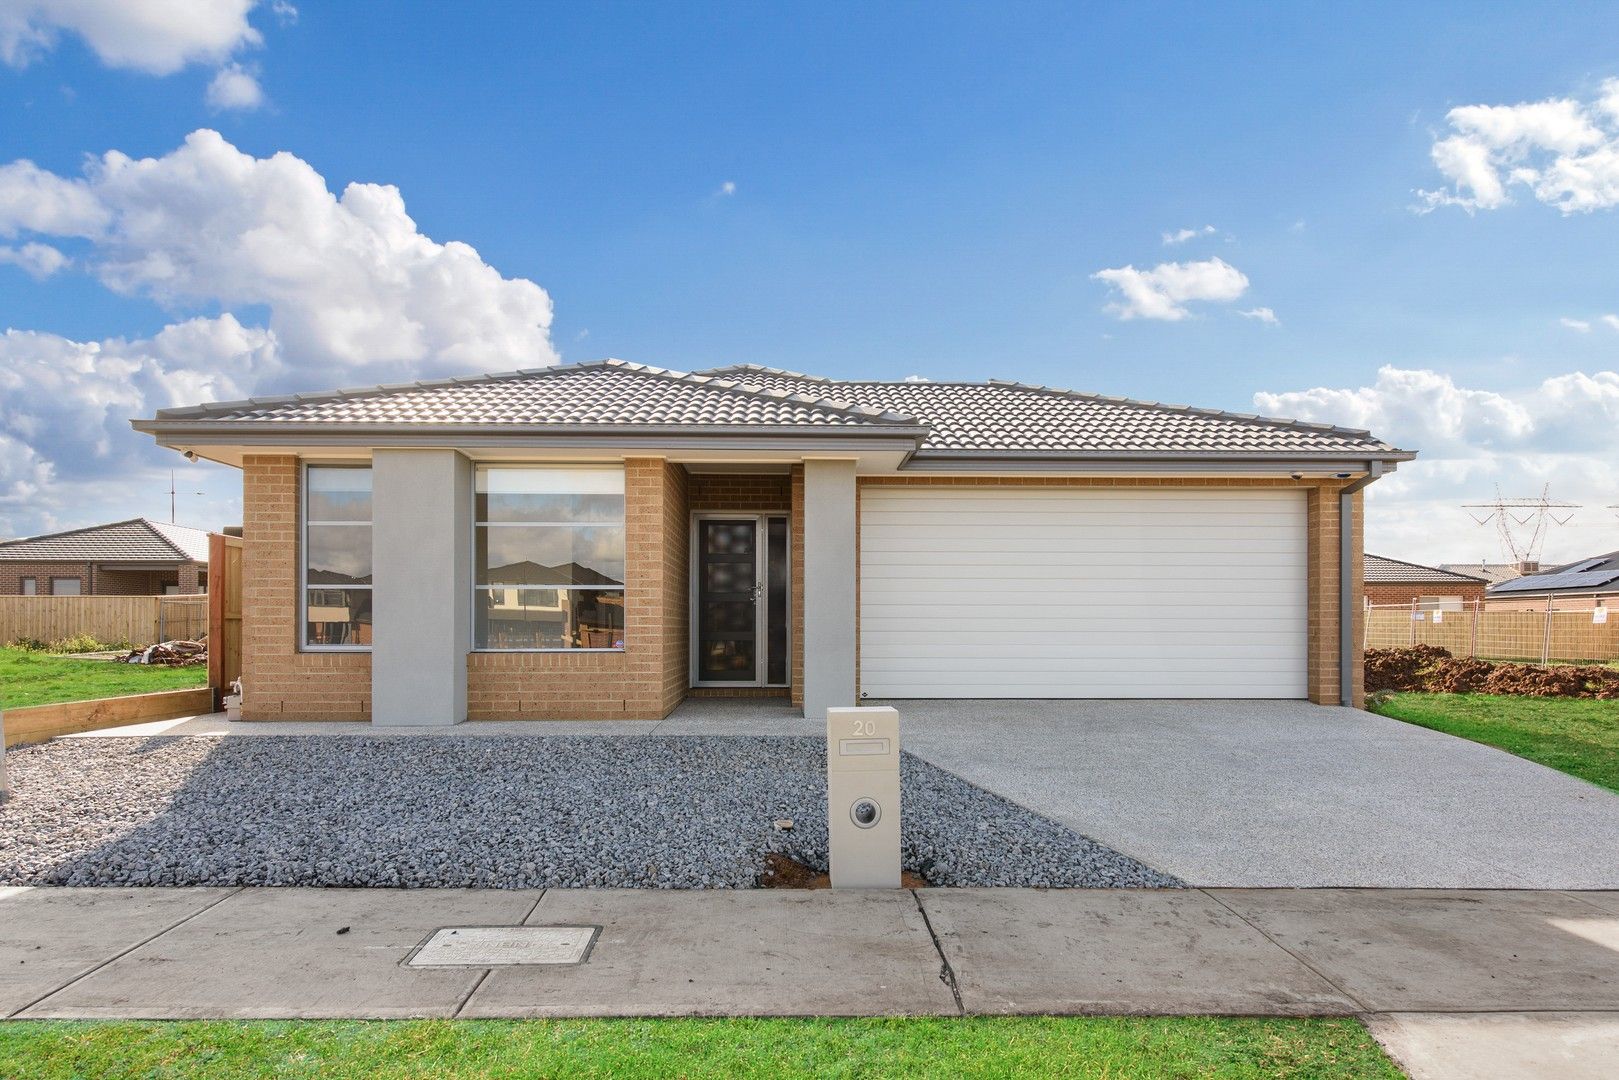 4 bedrooms House in 20 Messina Street FRASER RISE VIC, 3336